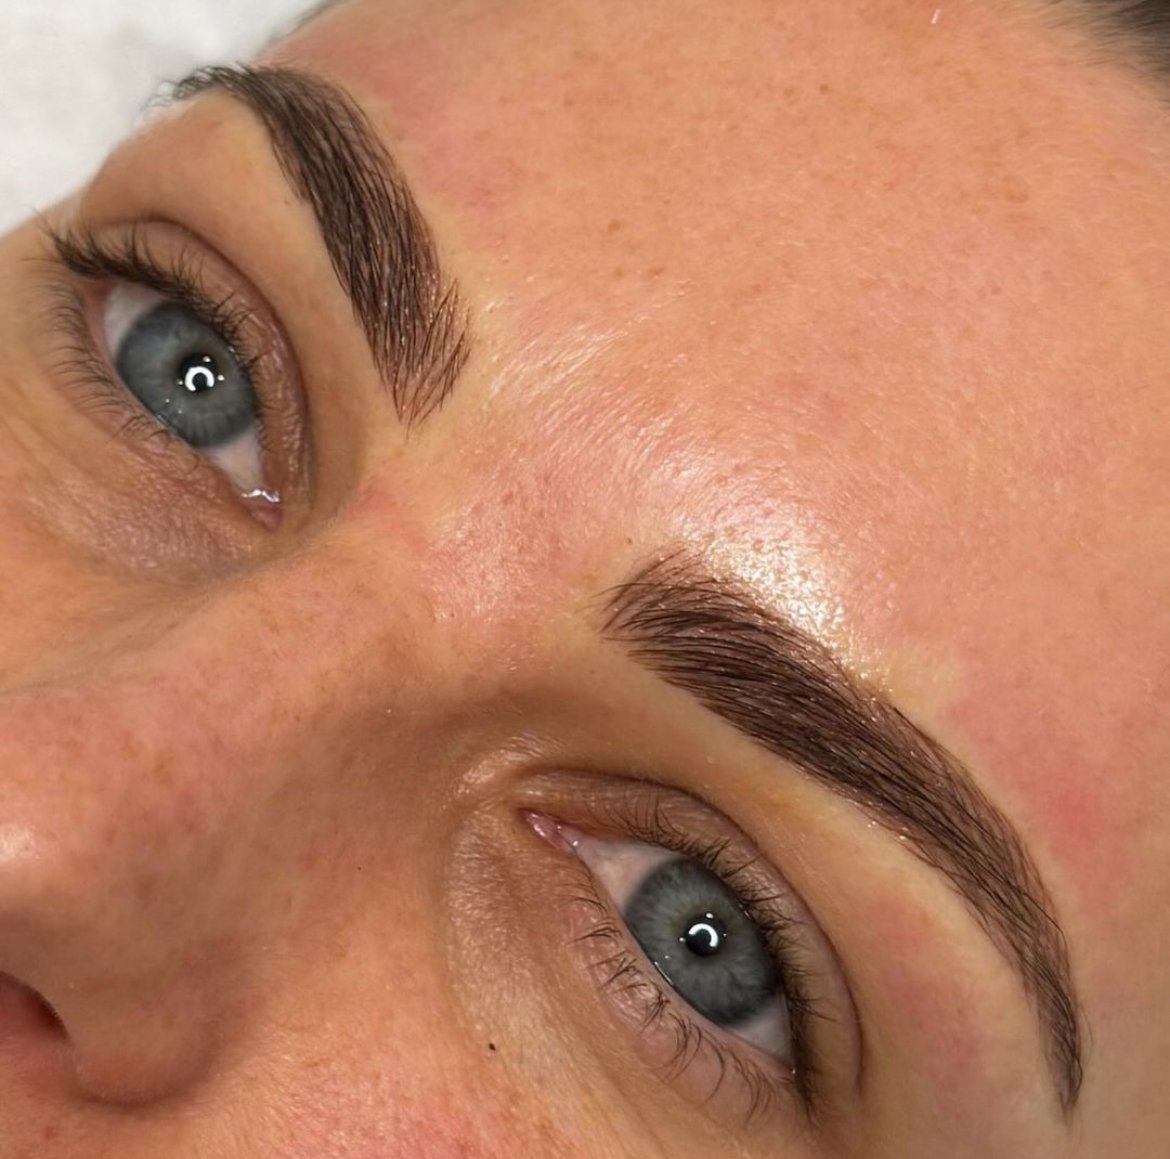 Tired of drawing on your brows every day? Get stunning, natural-looking brows with microblading! ✨

This semi-permanent procedure uses hair-like strokes to enhance your brows and give you a flawless look that lasts. A consultation is required. Initia